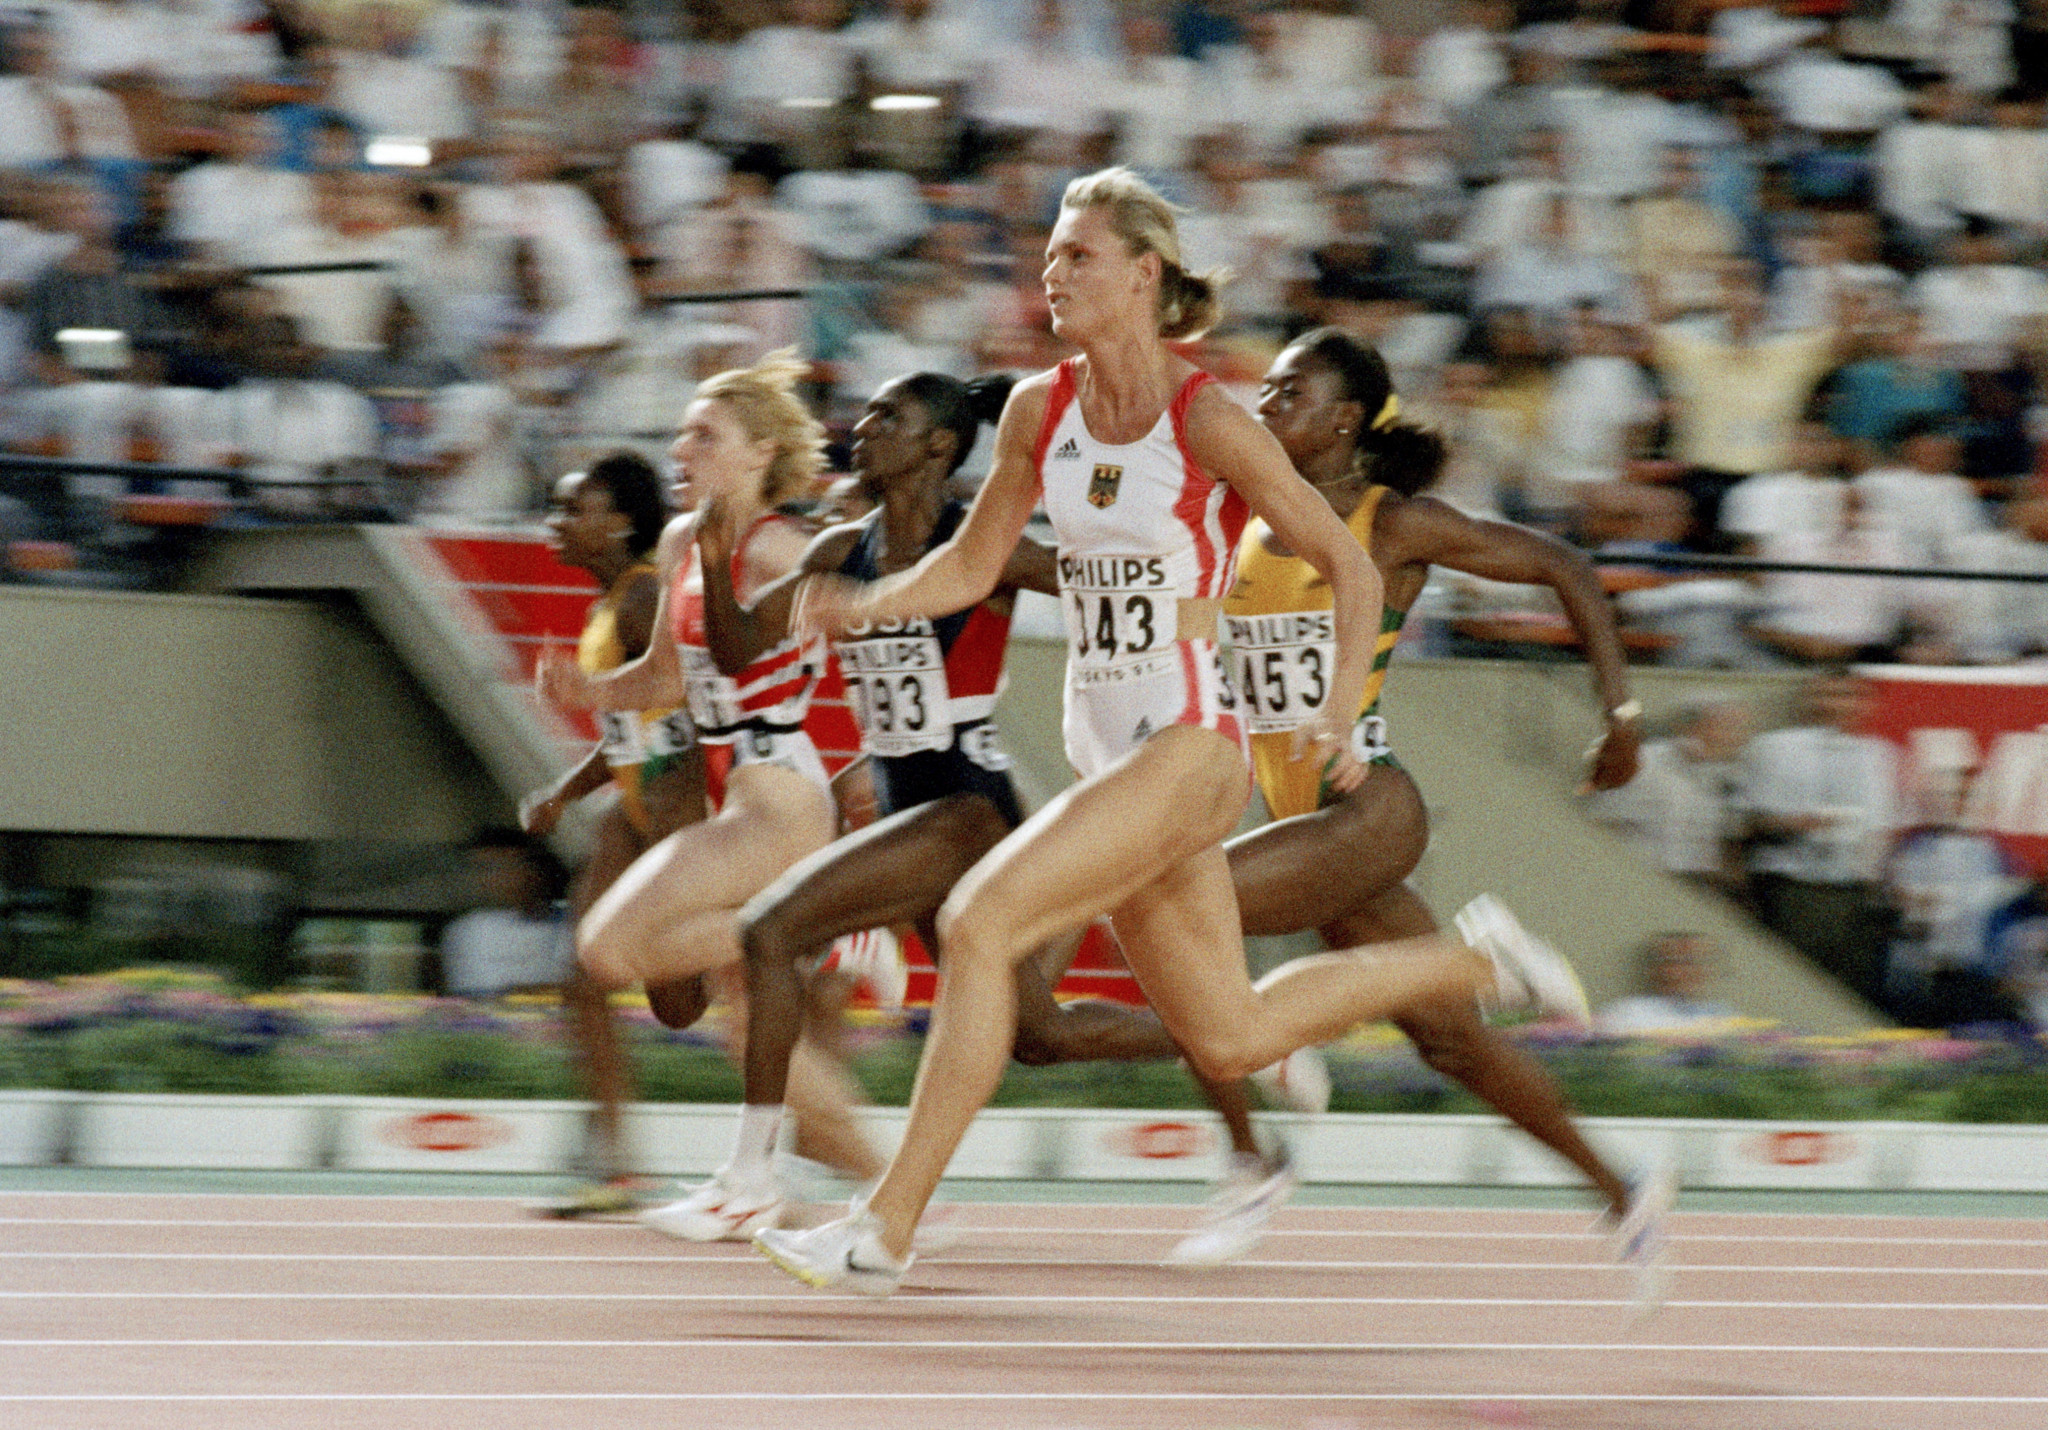 Katrin Krabbe won a 100m and 200m double, but would soon be banned for doping ©Getty Images